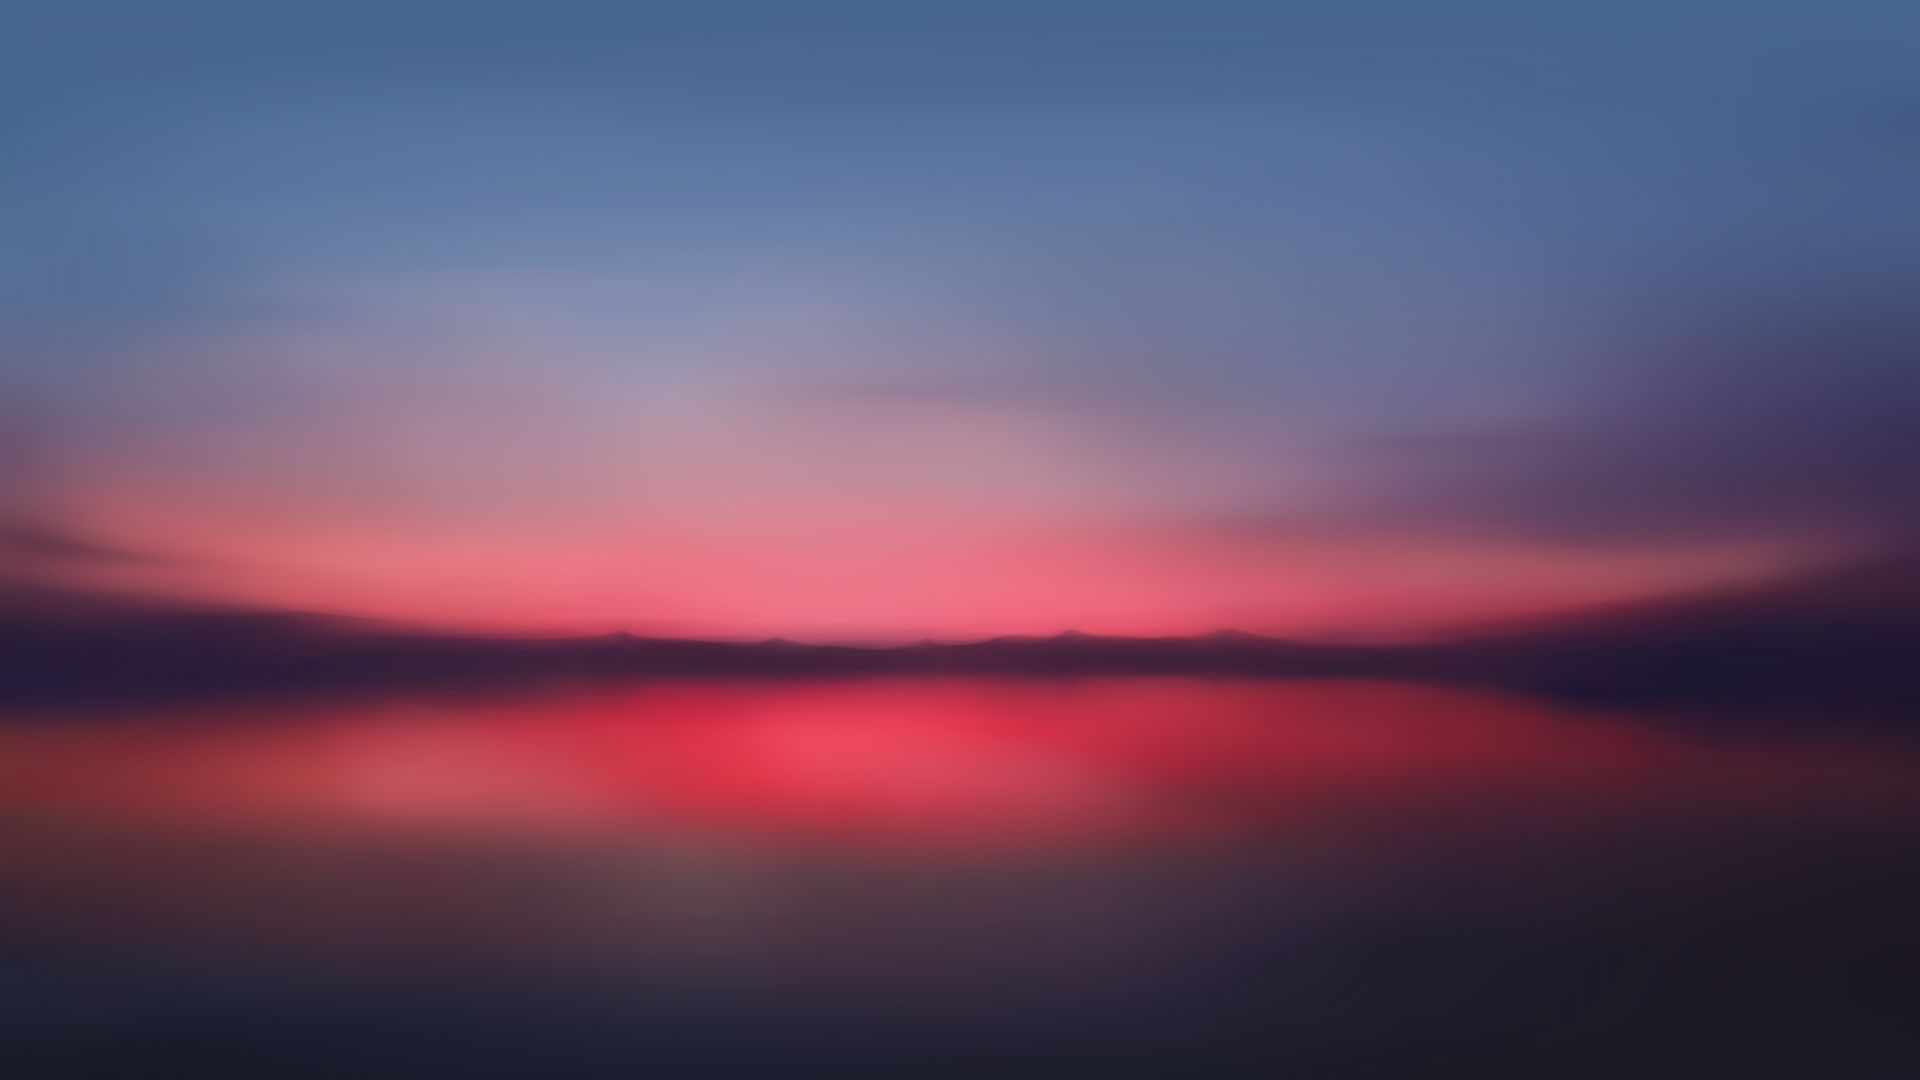 Desktop wallpaper nature, sky, colorful sky, red sunset, HD image, picture, background, 1dee7d